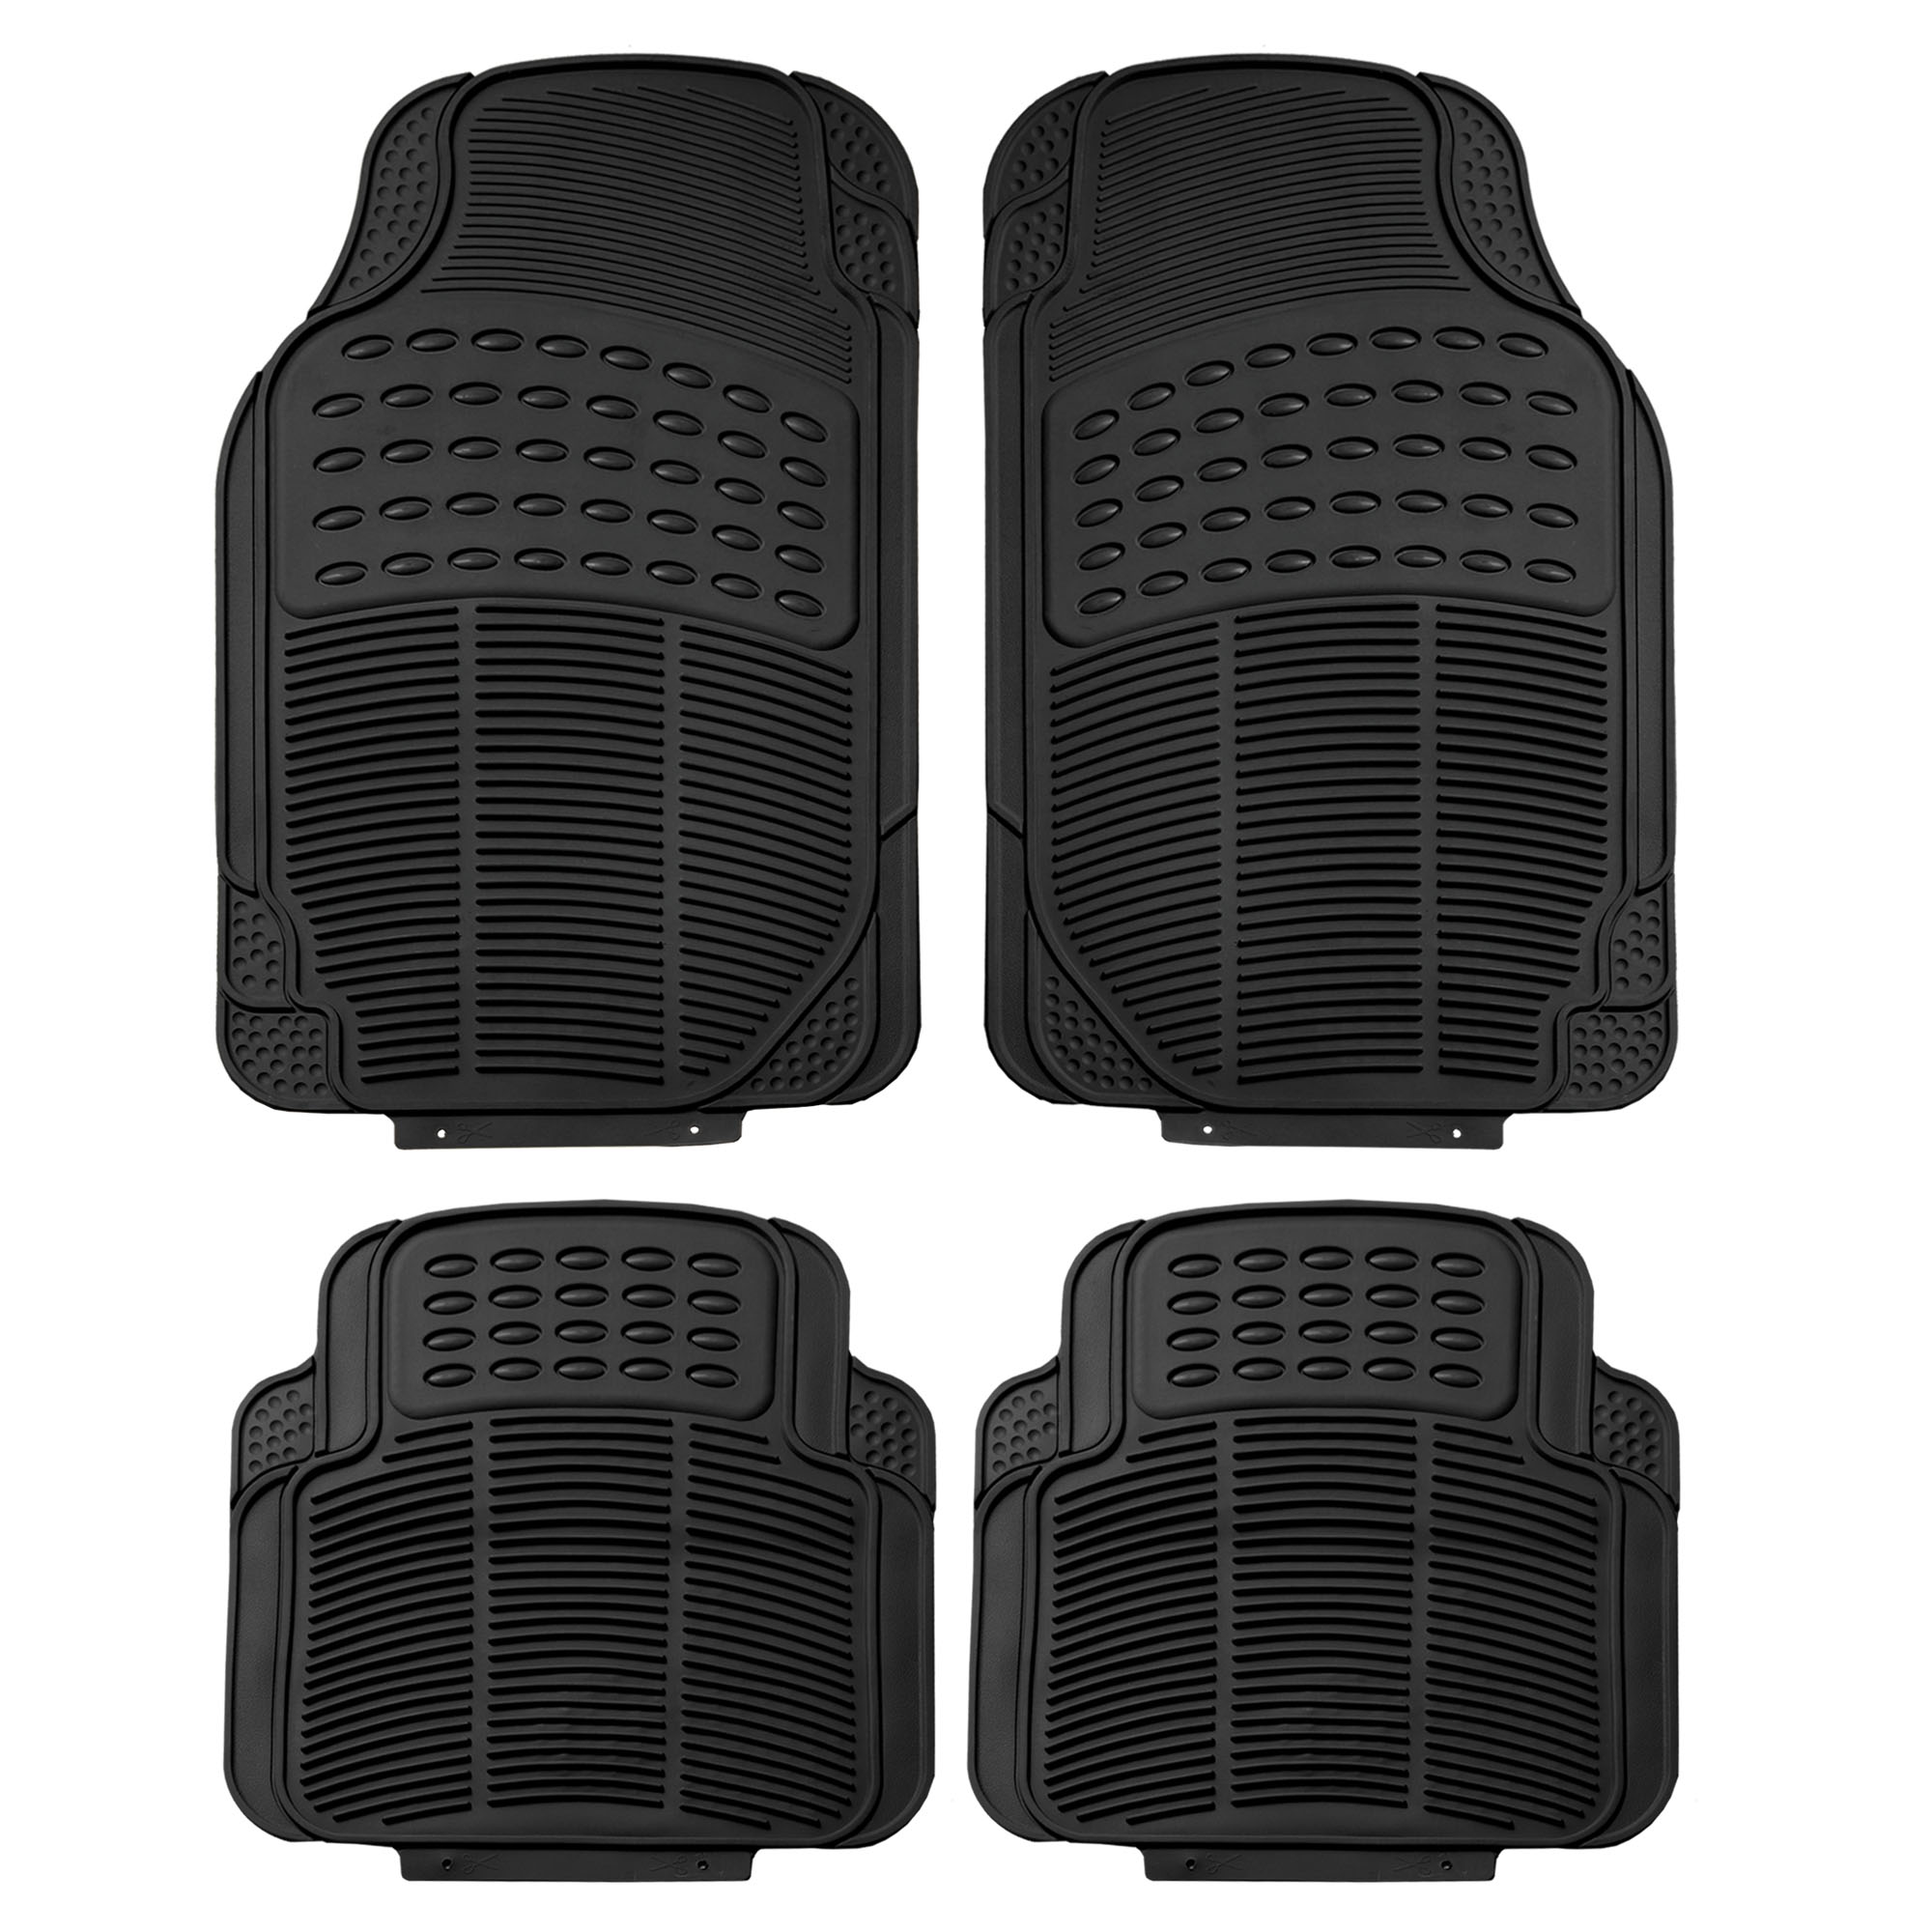 4PC All Weather Protection for Vehicle,Black PantsSaver Custom Fits Car Floor Mats for Audi A3 Sportback e-tron 2021,Front & 2nd Seat Heavy Duty Floor Mats 